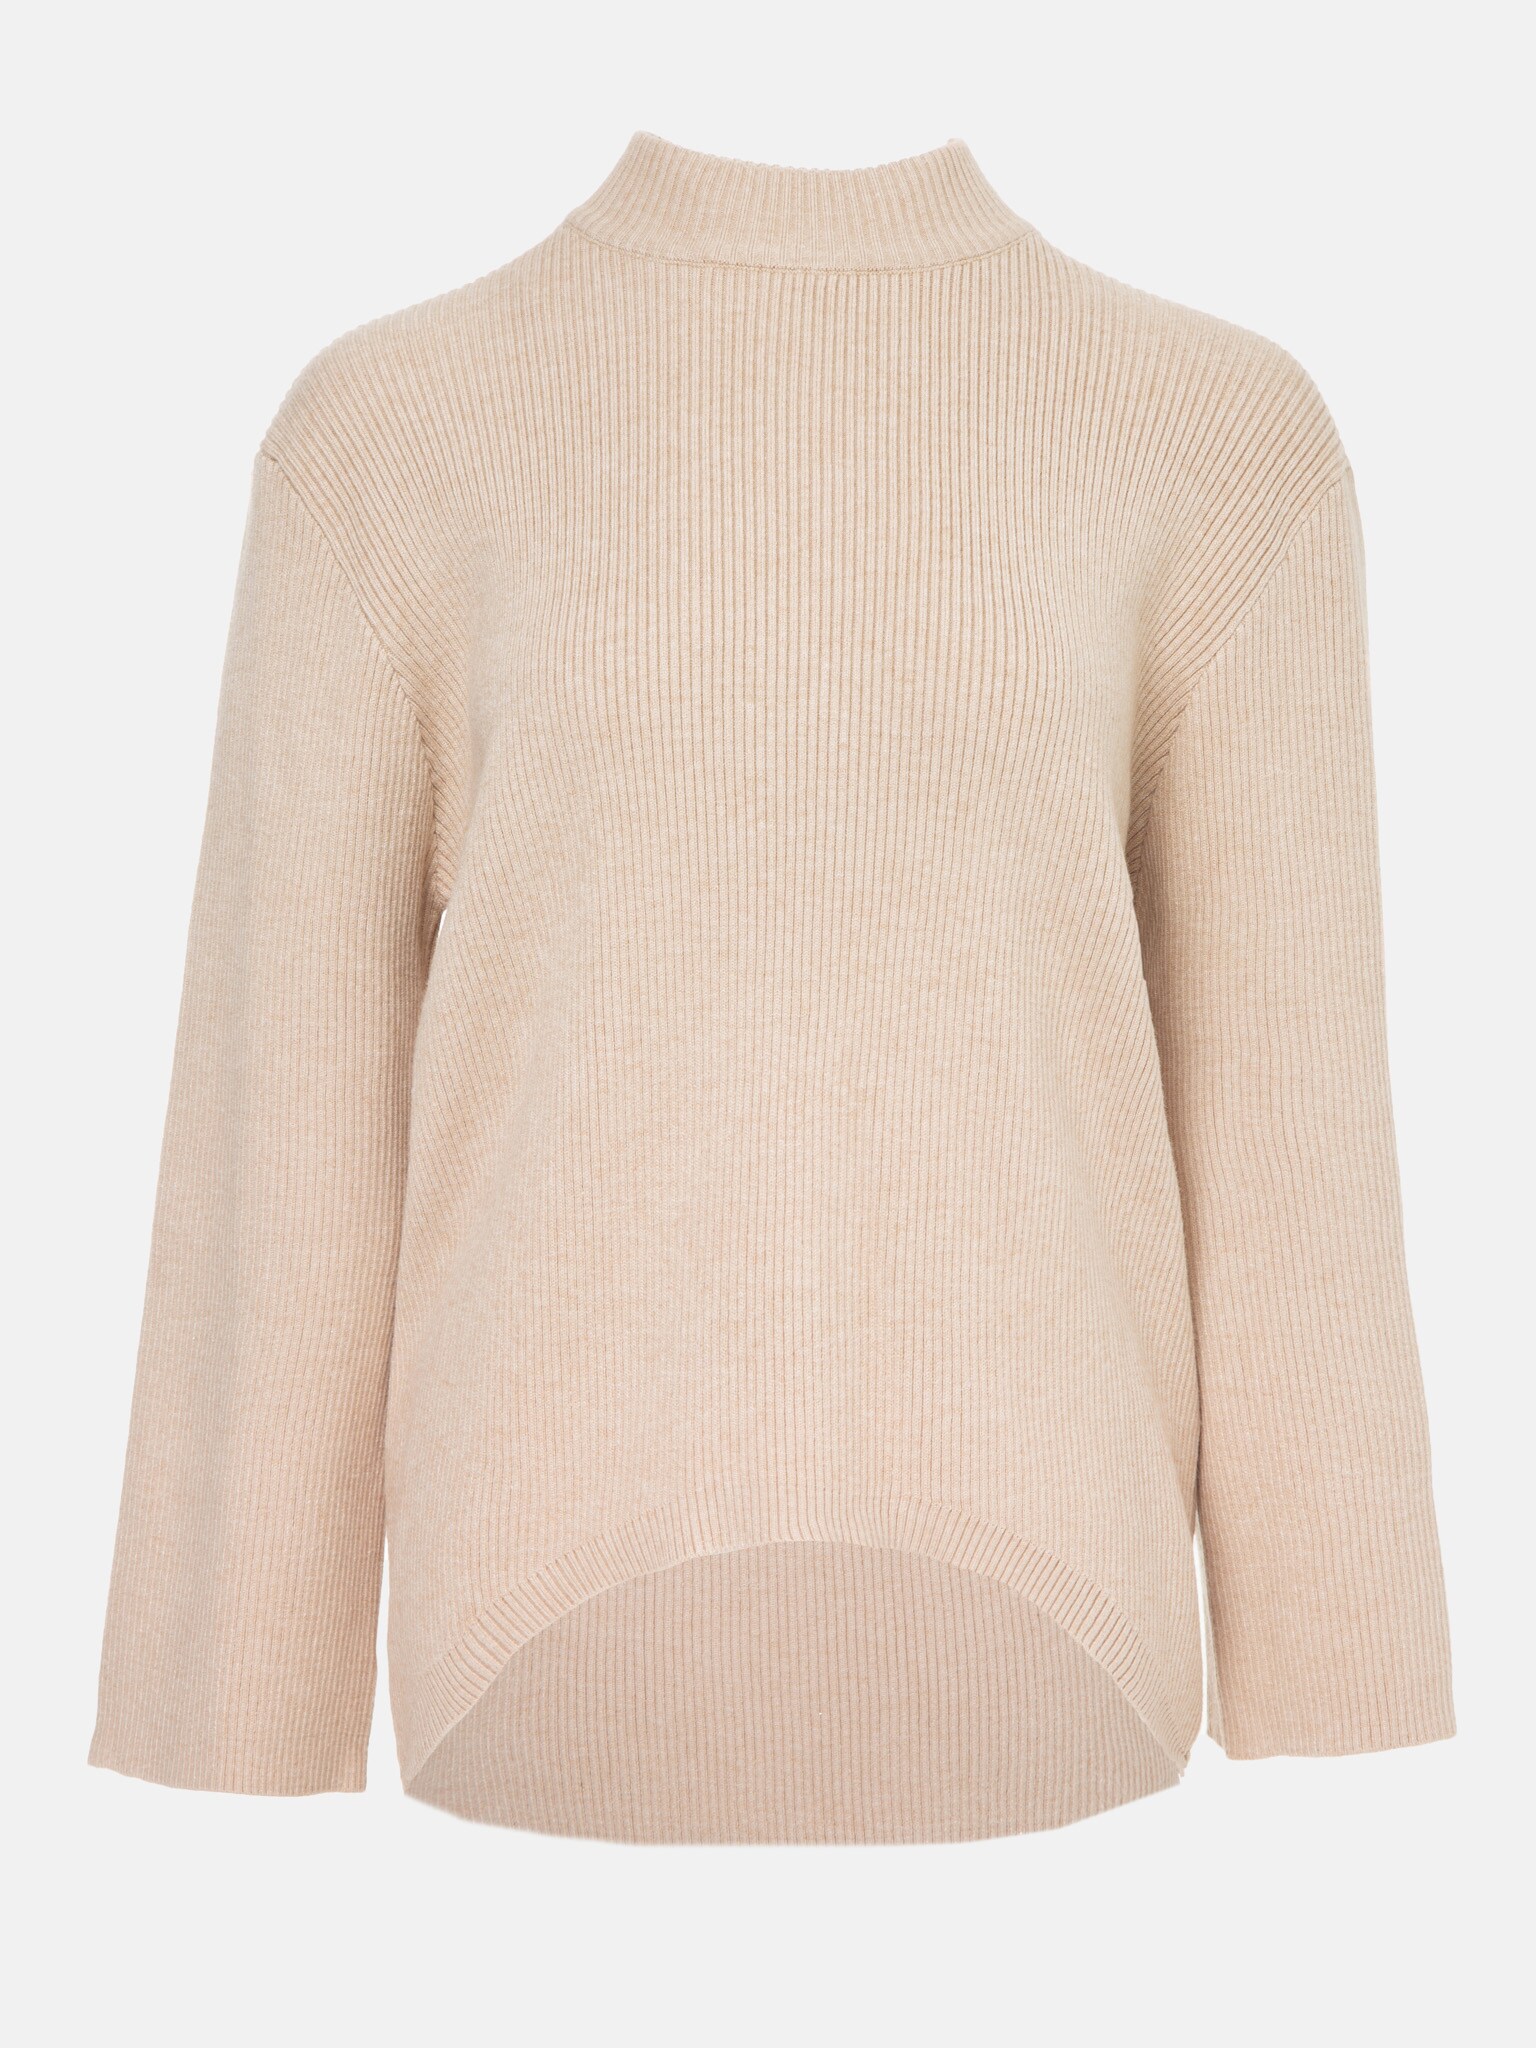 LICHI - Online fashion store :: Loose-fitting sweater with high collar